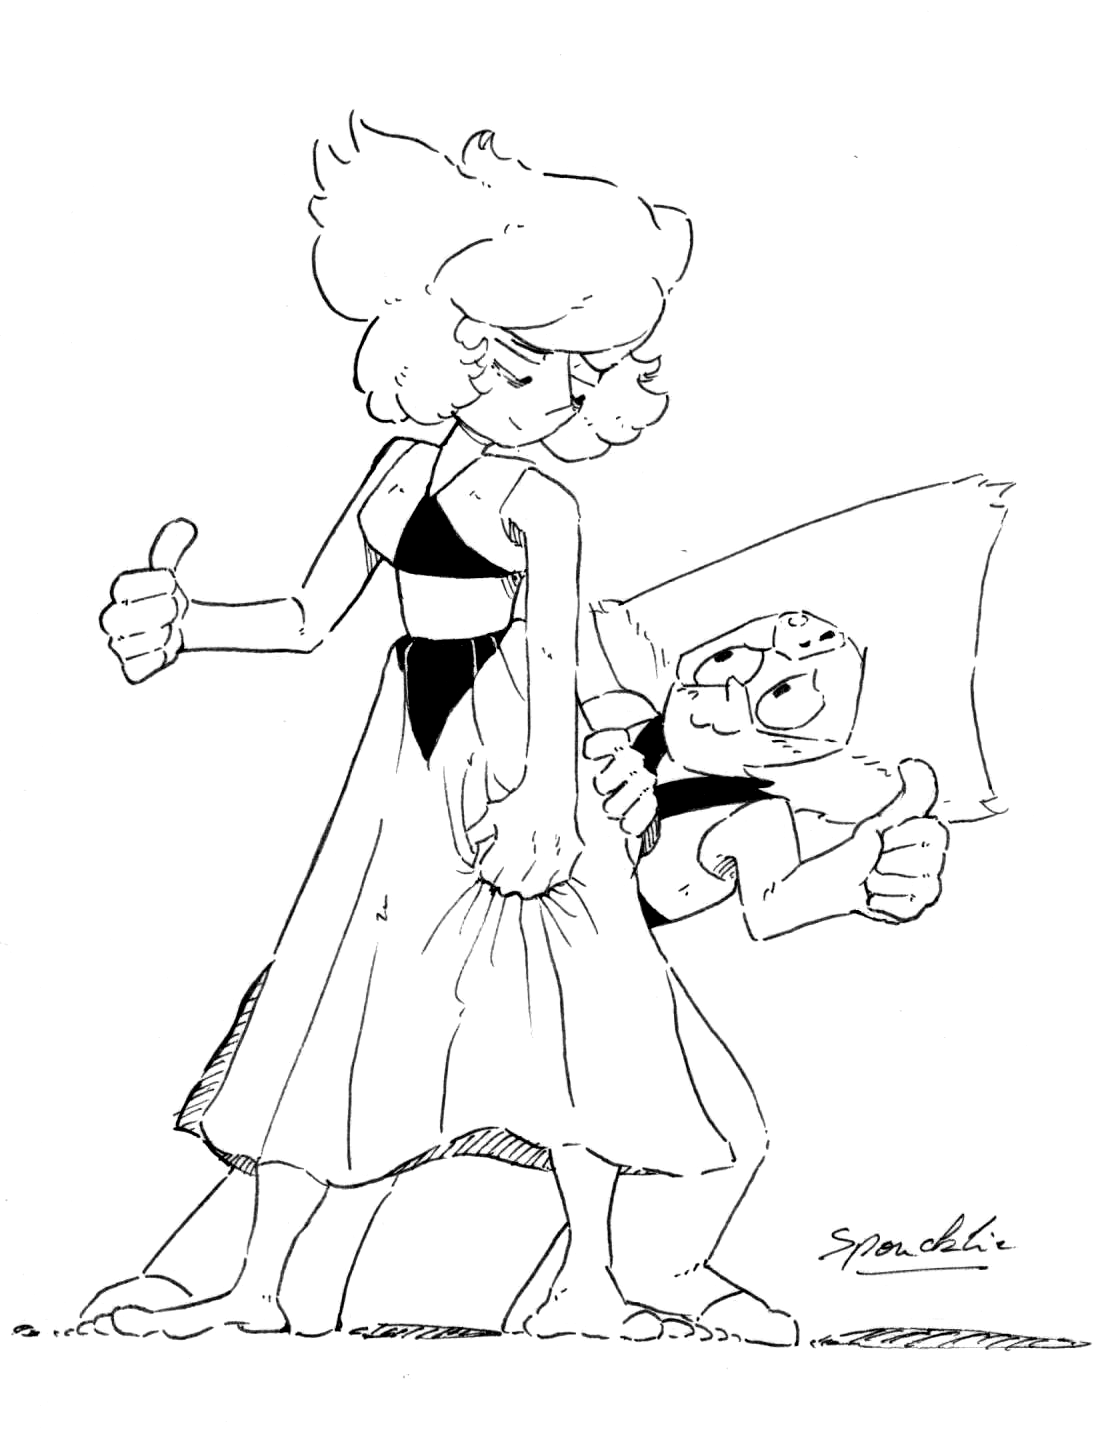 My ultimate Lapidot kink is Peridot cheering up Lapis.(jk they need to kiss)